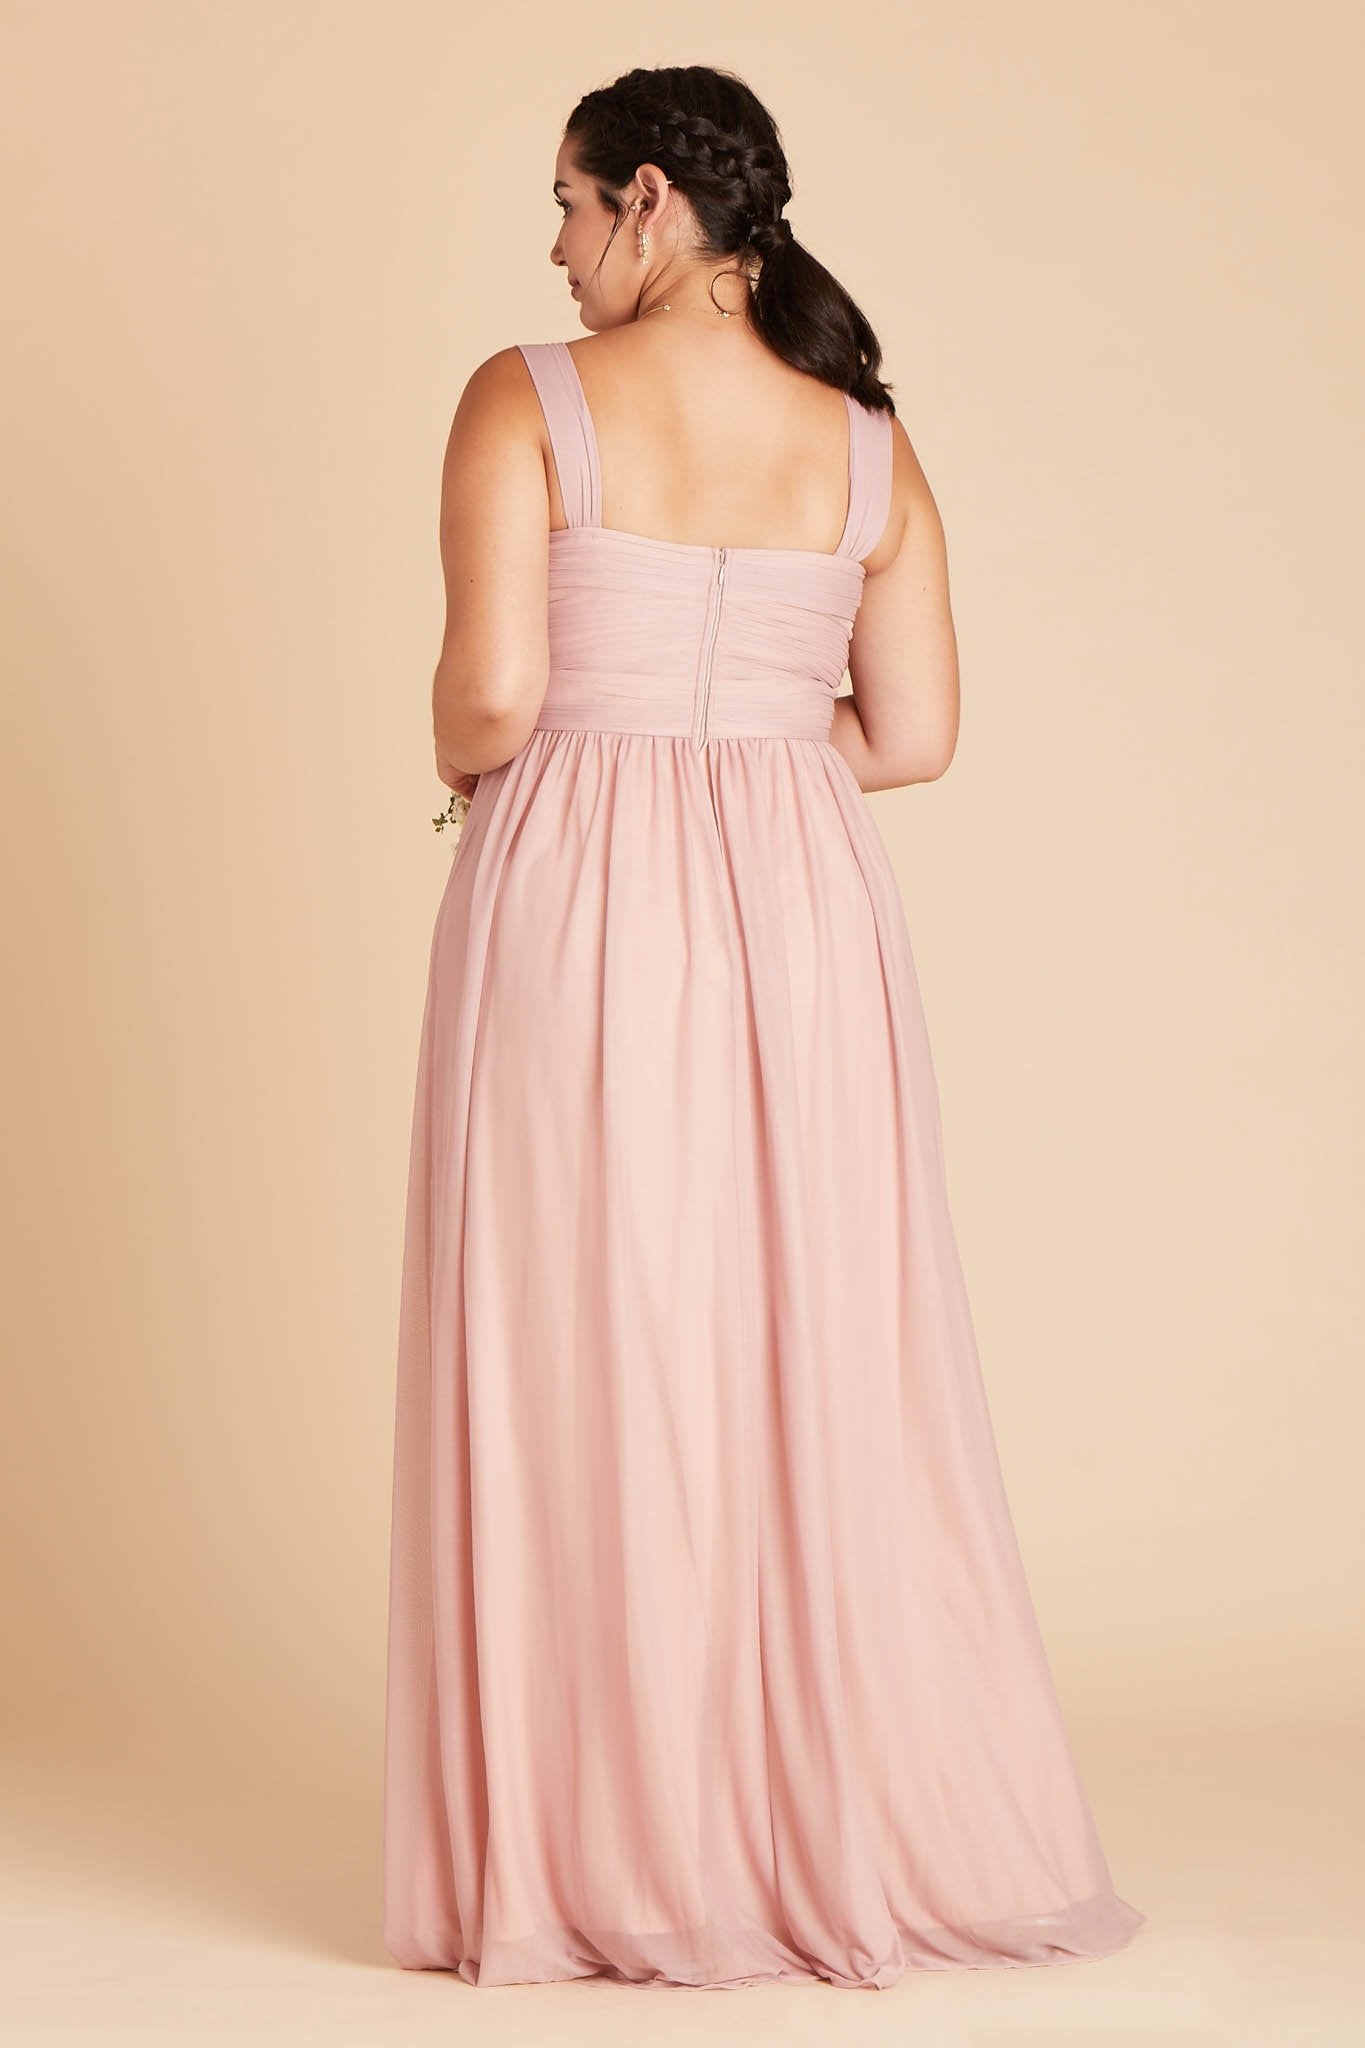 Back view of the Elsye Plus Size Bridesmaid Dress in dusty rose mesh reveals a square cut just below the shoulder blades and the pleated column skirt gracefully flowing to the floor.